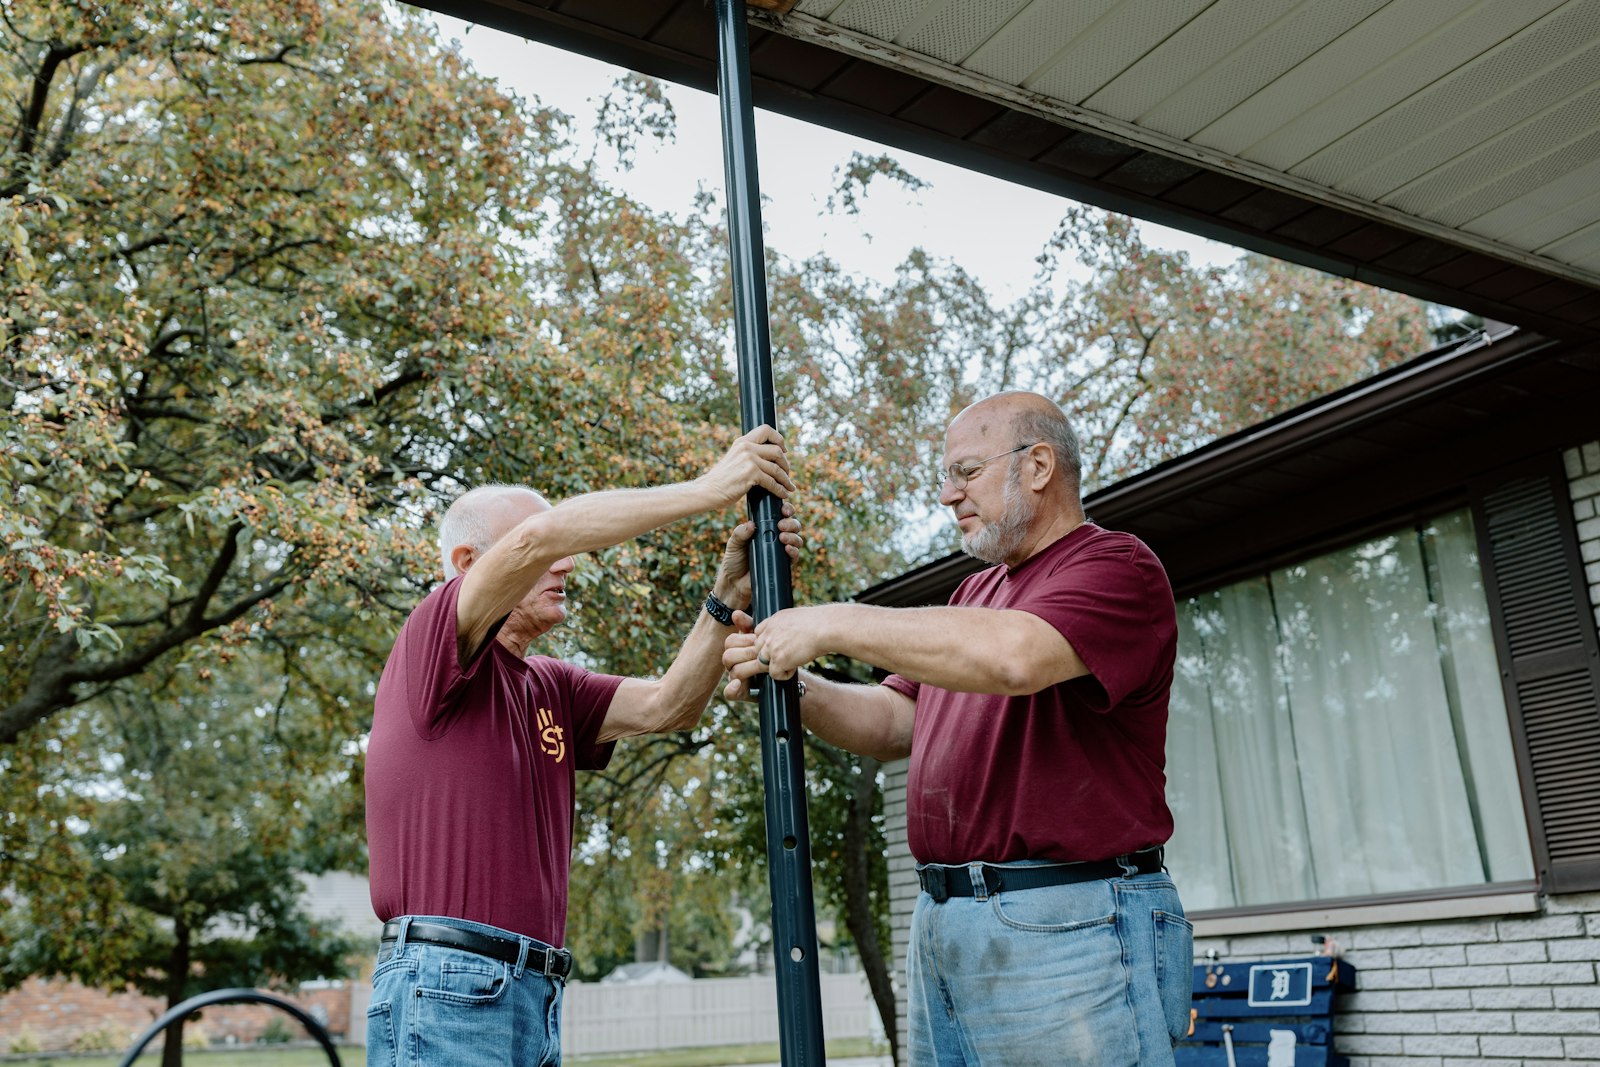 Hill and Rosati got involved with St. Joseph’s Helpers as a way to give back to people in the community, but also because they enjoy doing handywork, and St. Joseph’s Helpers is an outlet to use the talents God has given them.